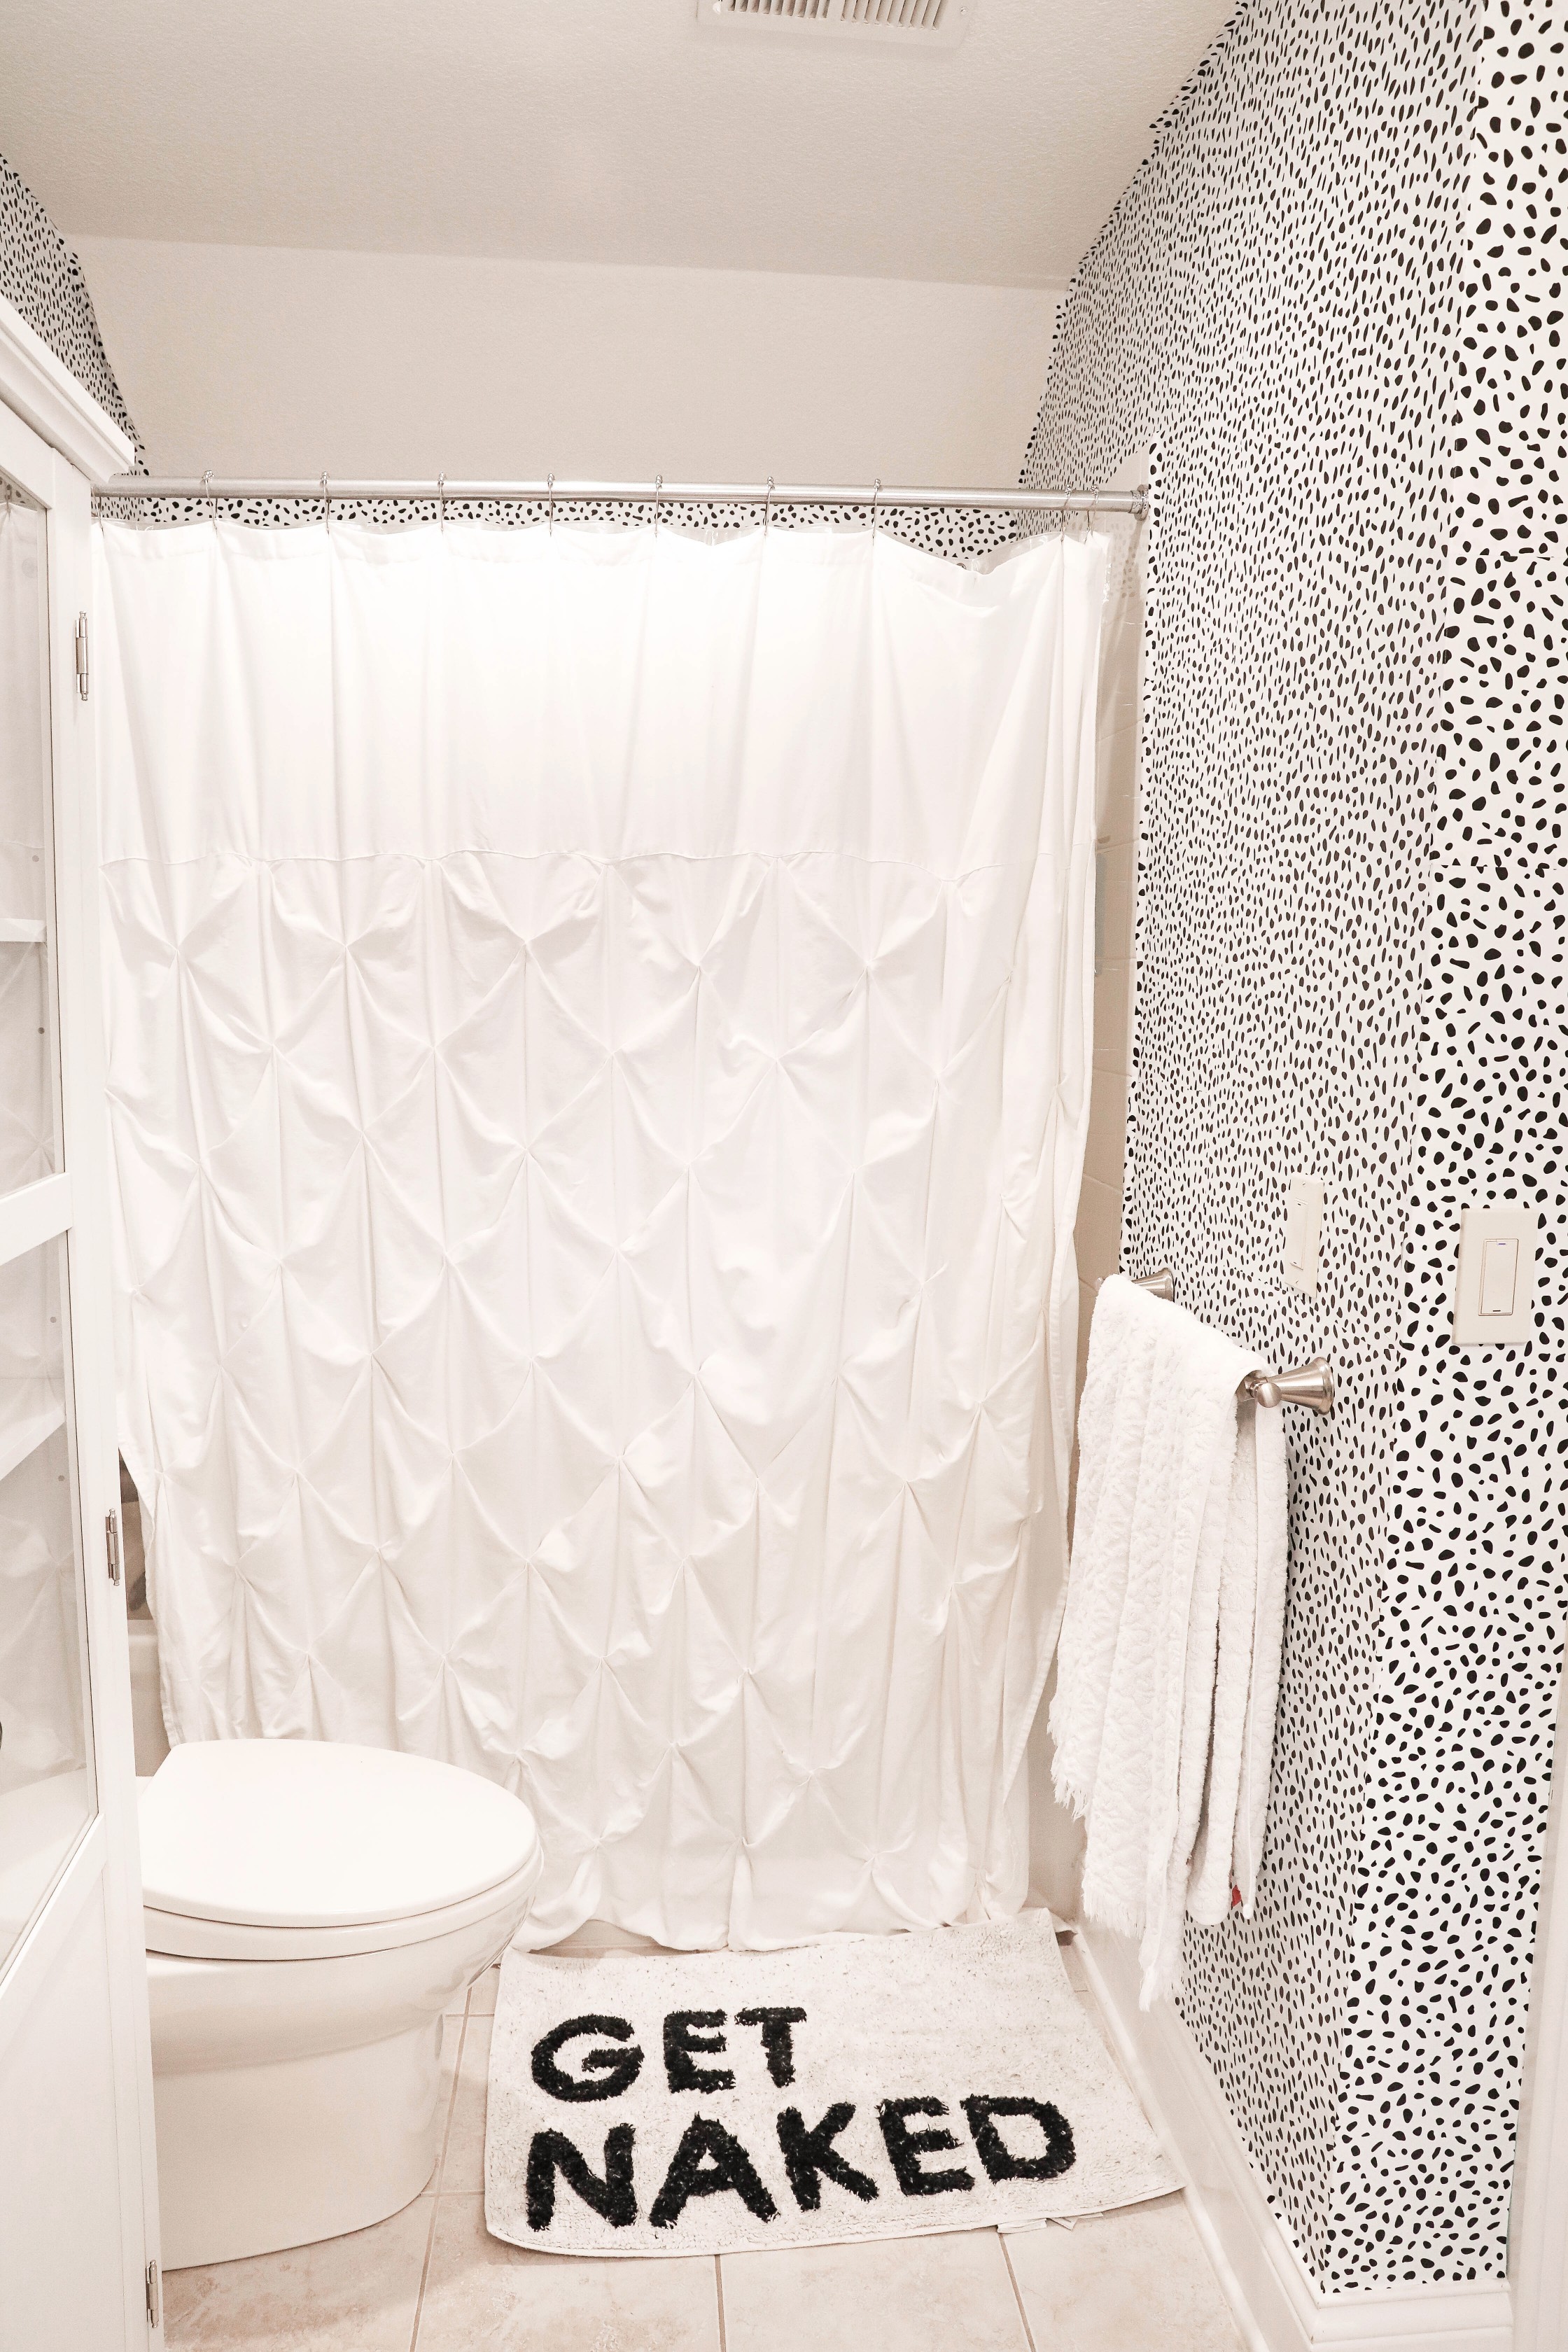 Bathroom Transformation | New Wallpaper + Before & After Photos ...